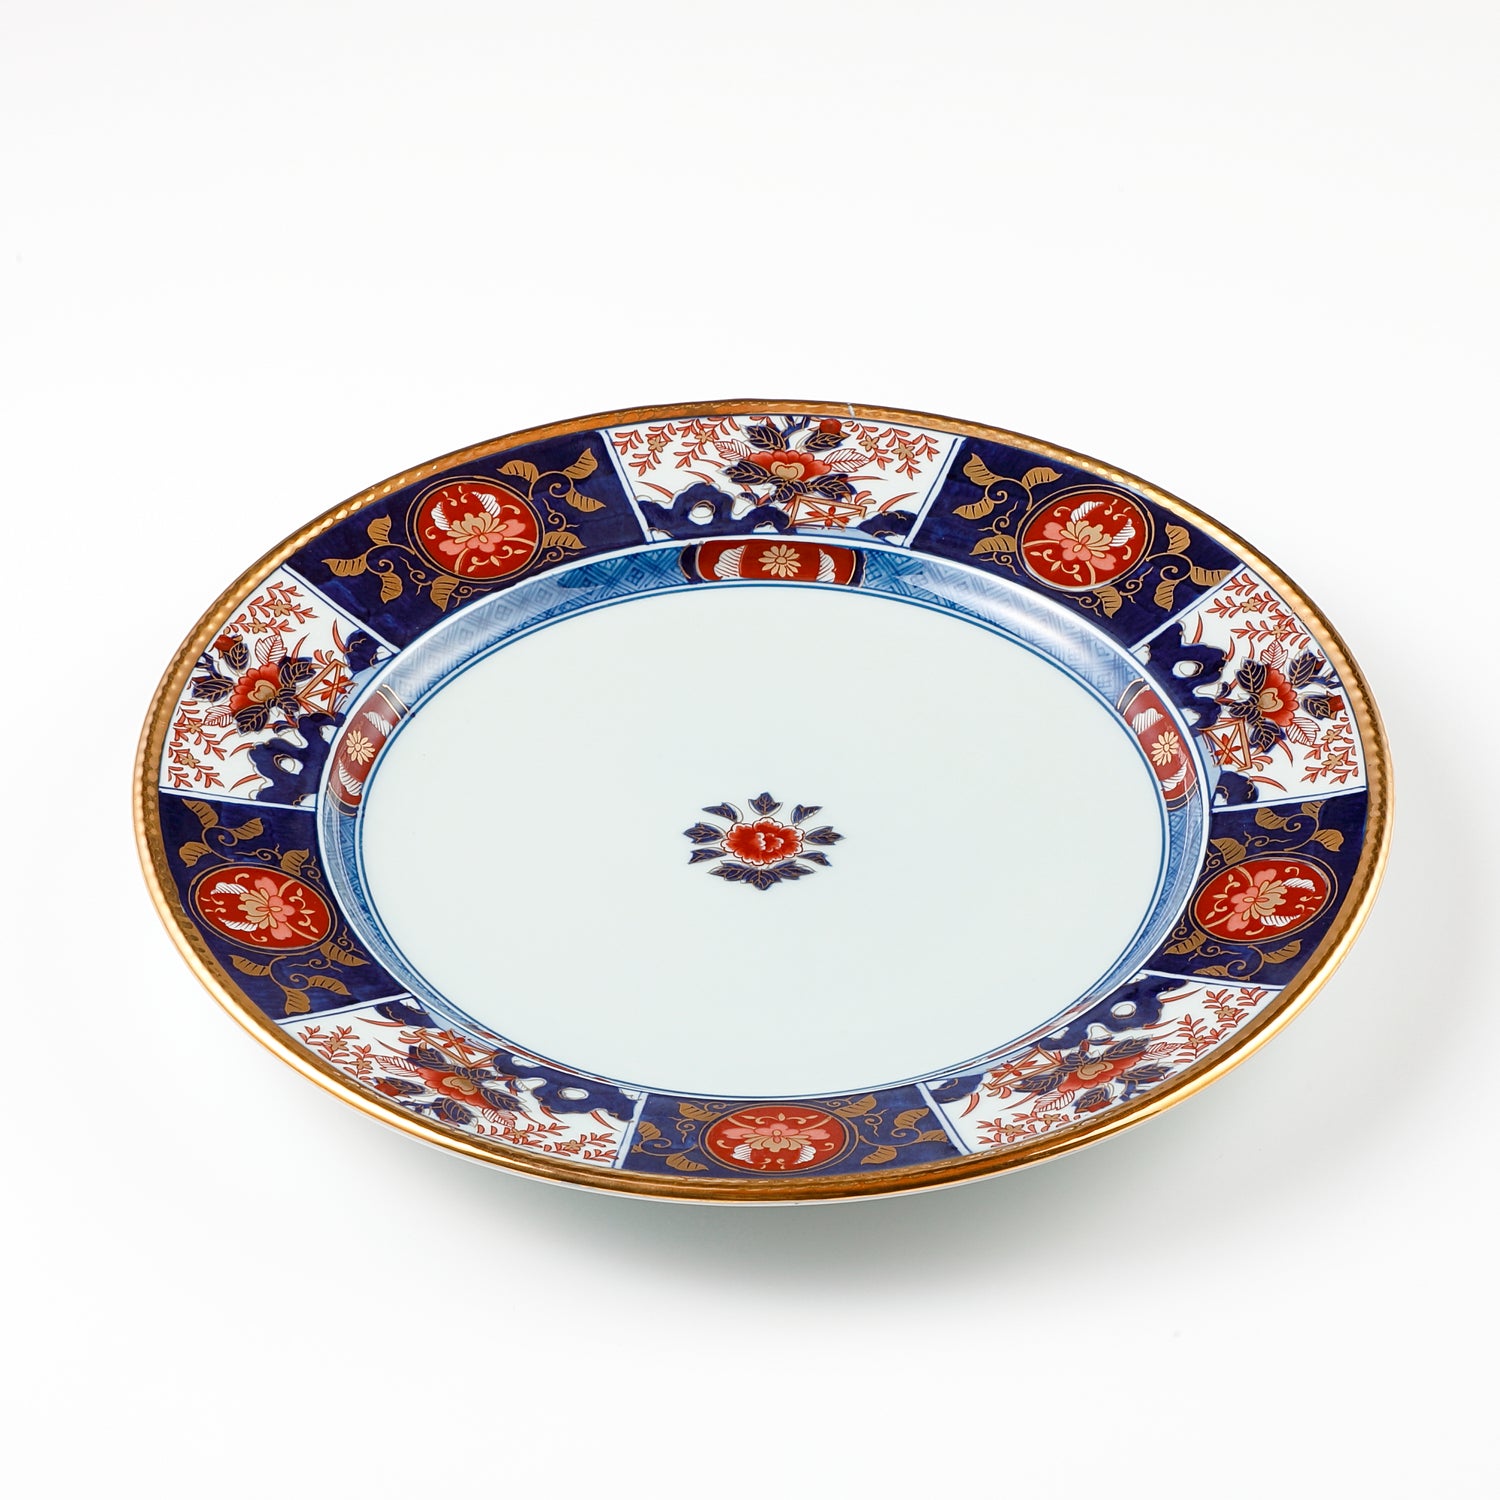 Dish and Plate